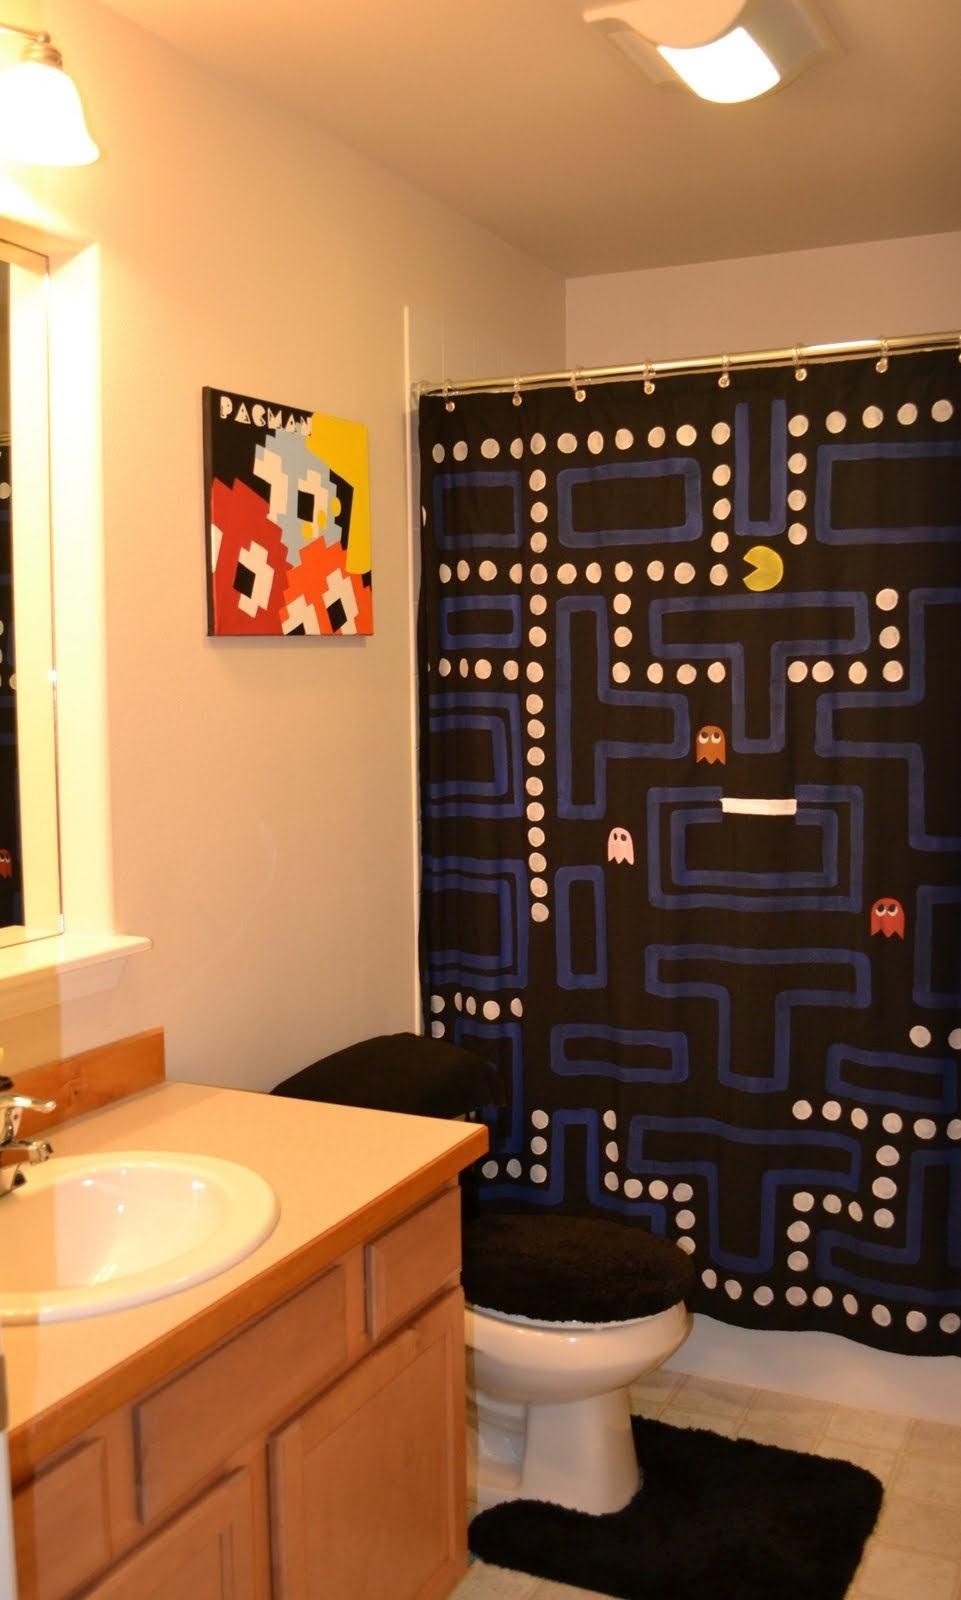 How to Make an Amazing Pac-Man Shower Curtain!